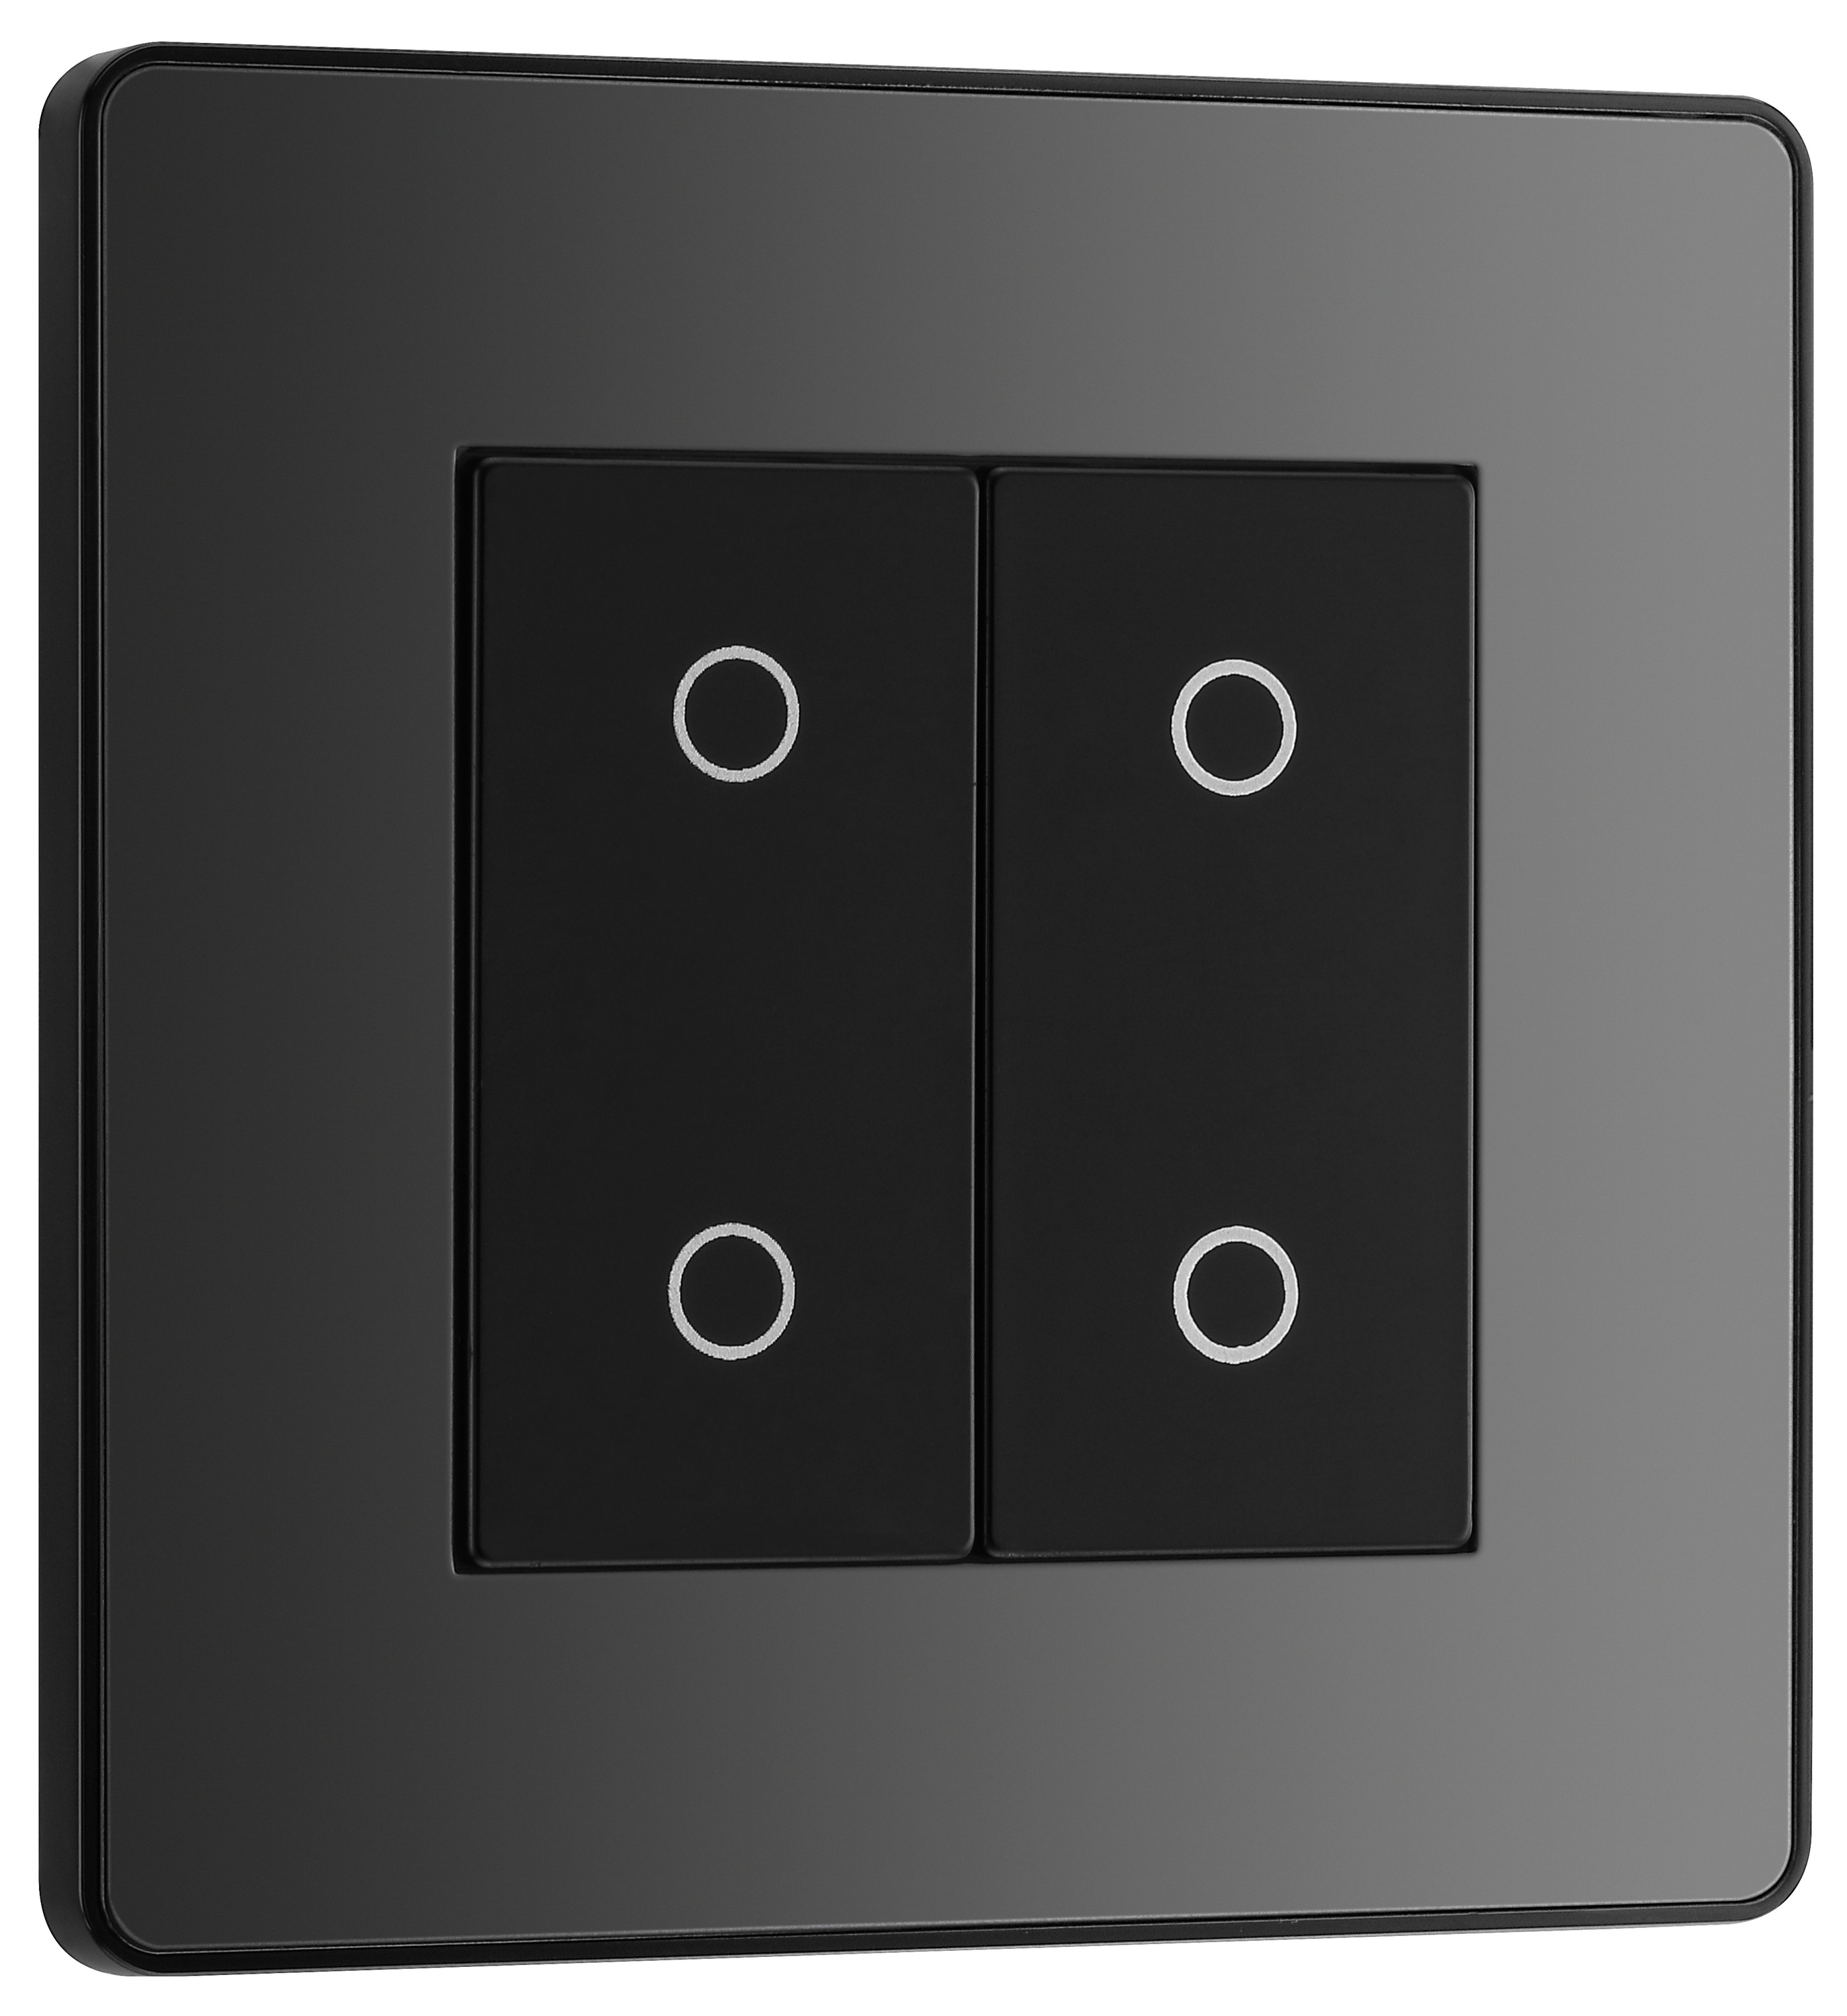 Image of BG Evolve Secondary Black Chrome 2 Way Double Touch Dimmer Switch - 200W